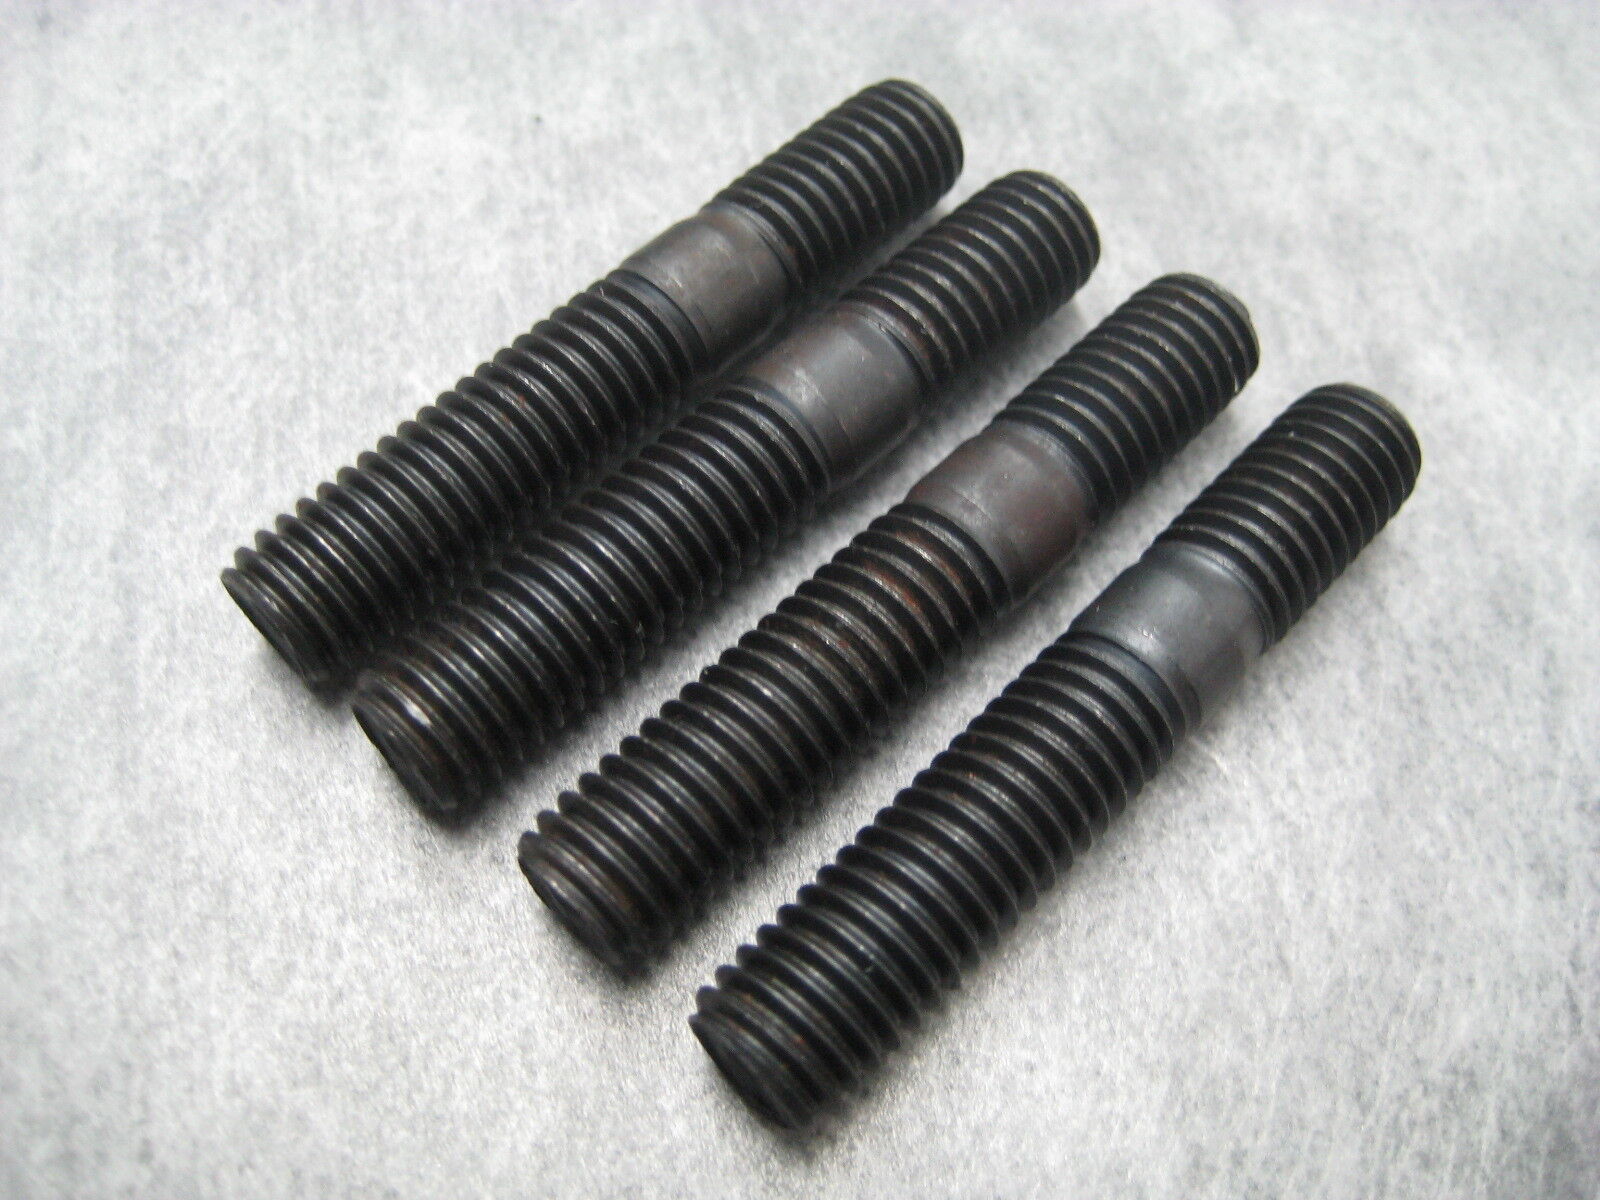 8mm Exhaust Manifold Stud M8x1.25 - Pack of 4 Studs - Ships Fast